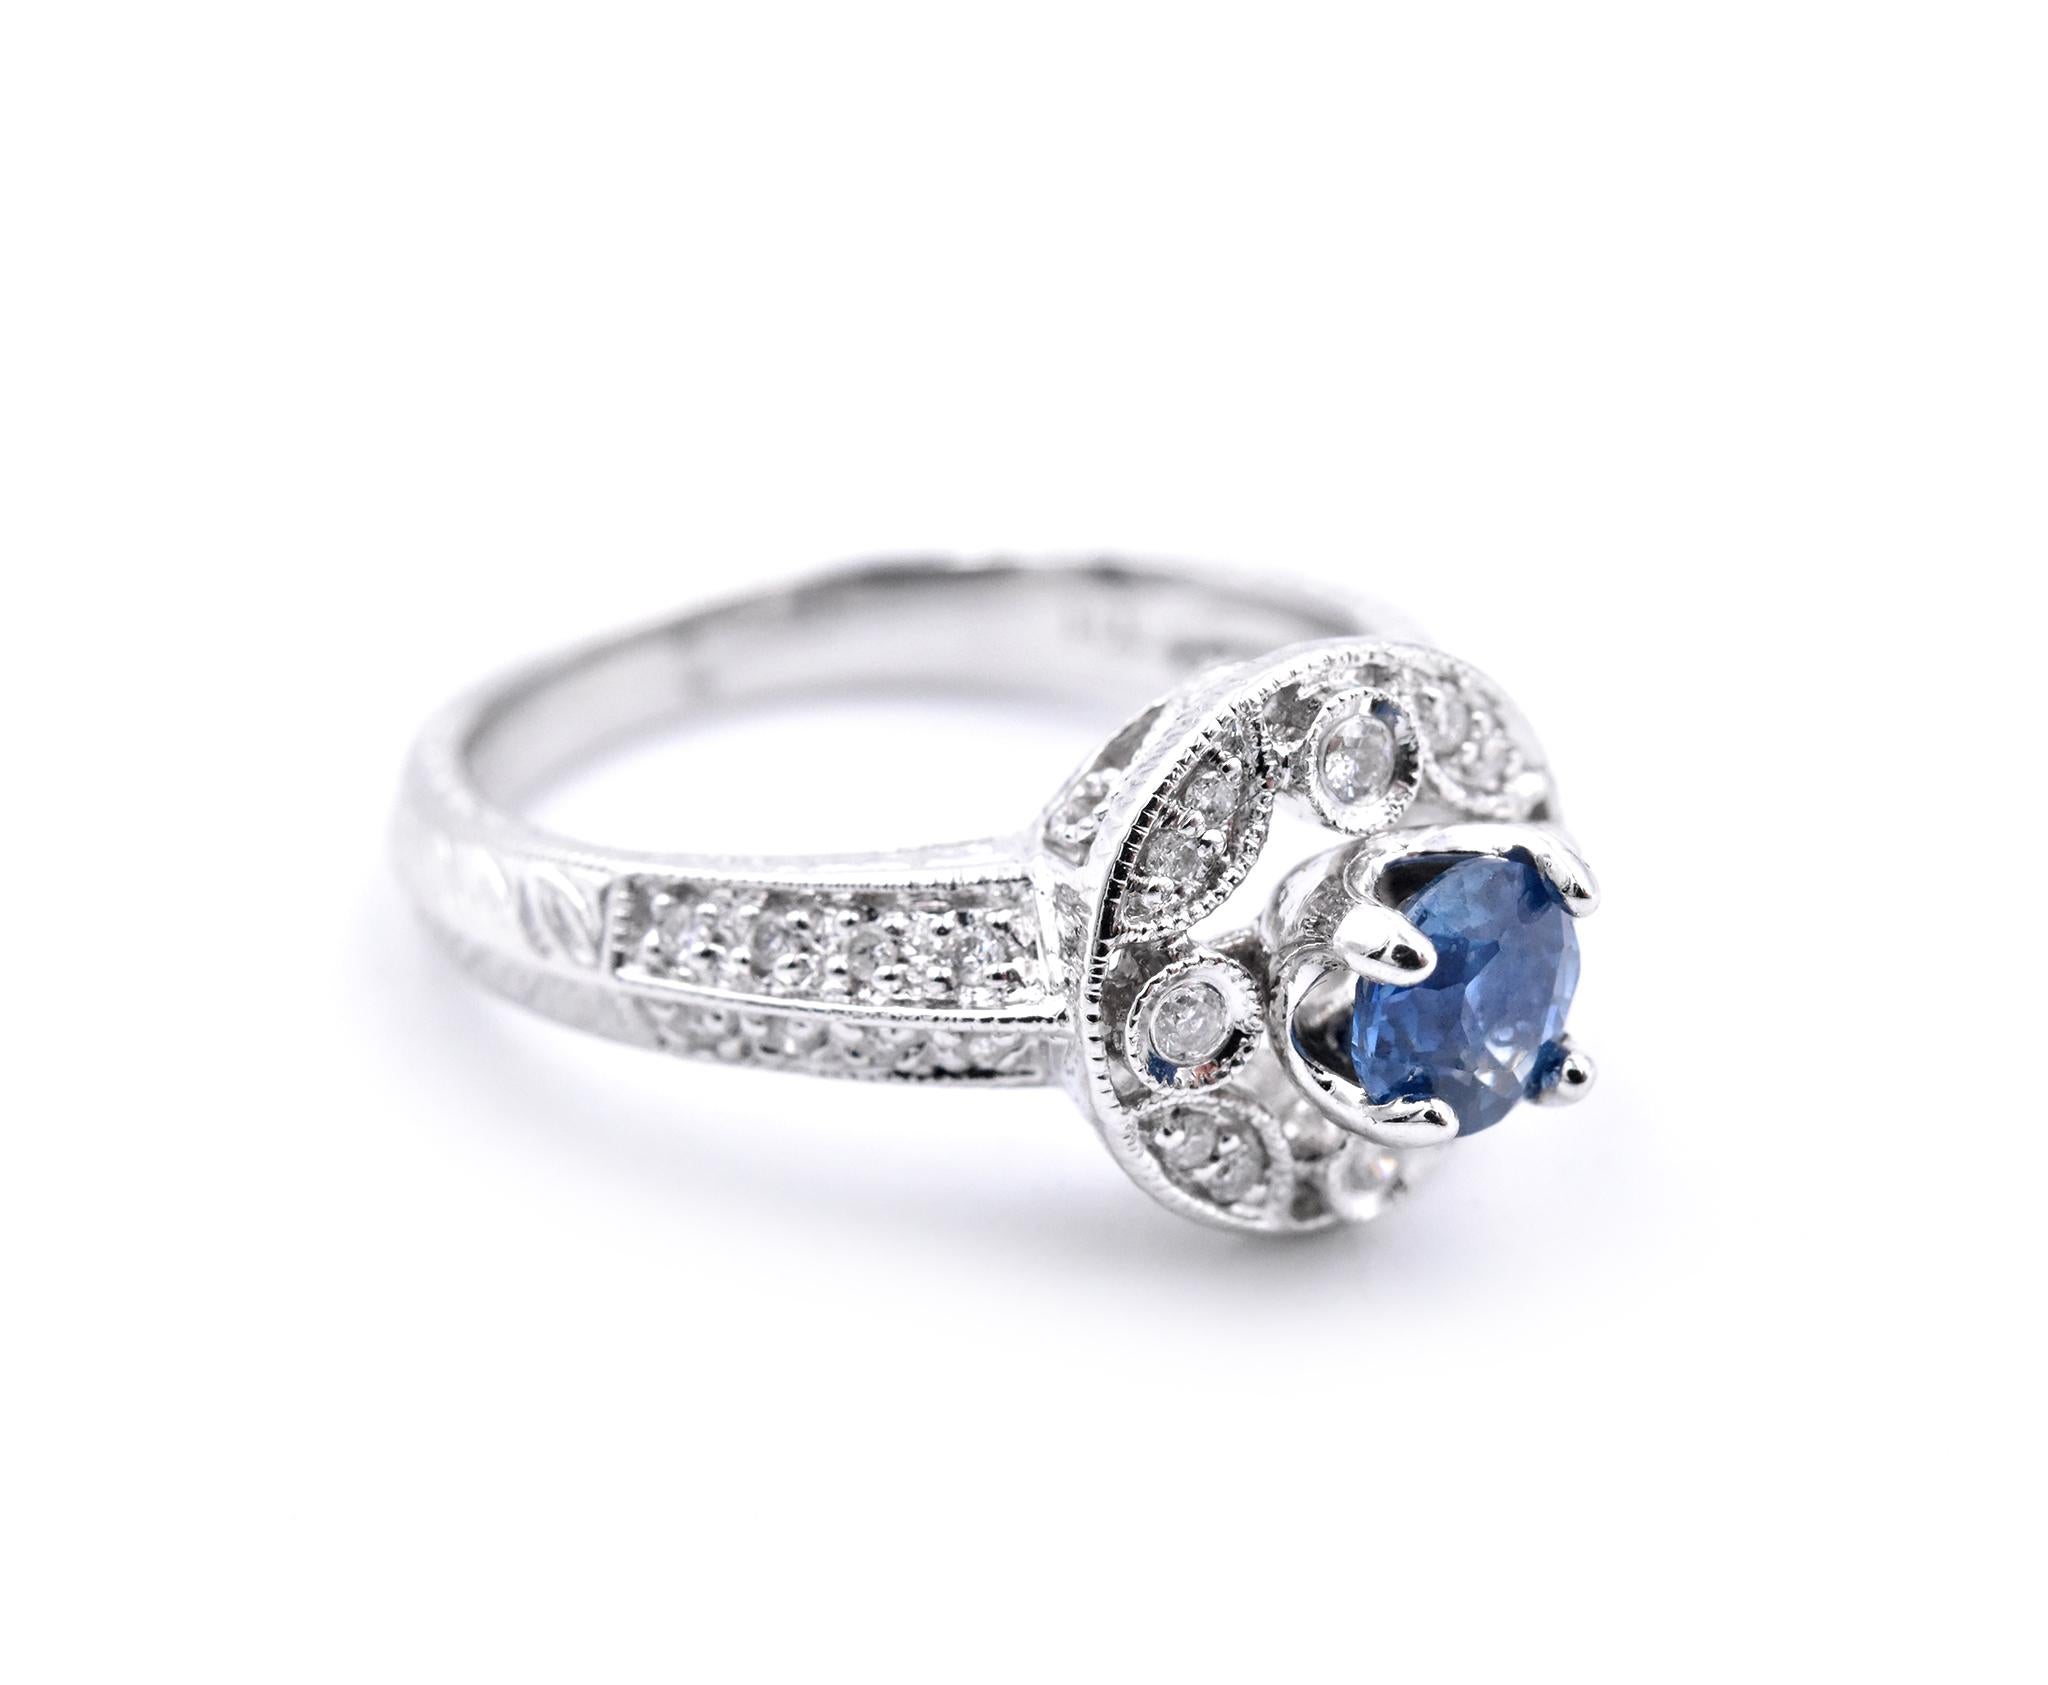 Designer: custom design
Material: 14k white gold
Gemstones: Sapphire = .70ct Oval
Certification: AGI 25324
Diamonds: 42 round brilliant cuts = .52cttw
Color: F
Clarity: VS2-SI
Ring Size: 7.5 (please allow two additional shipping days for sizing